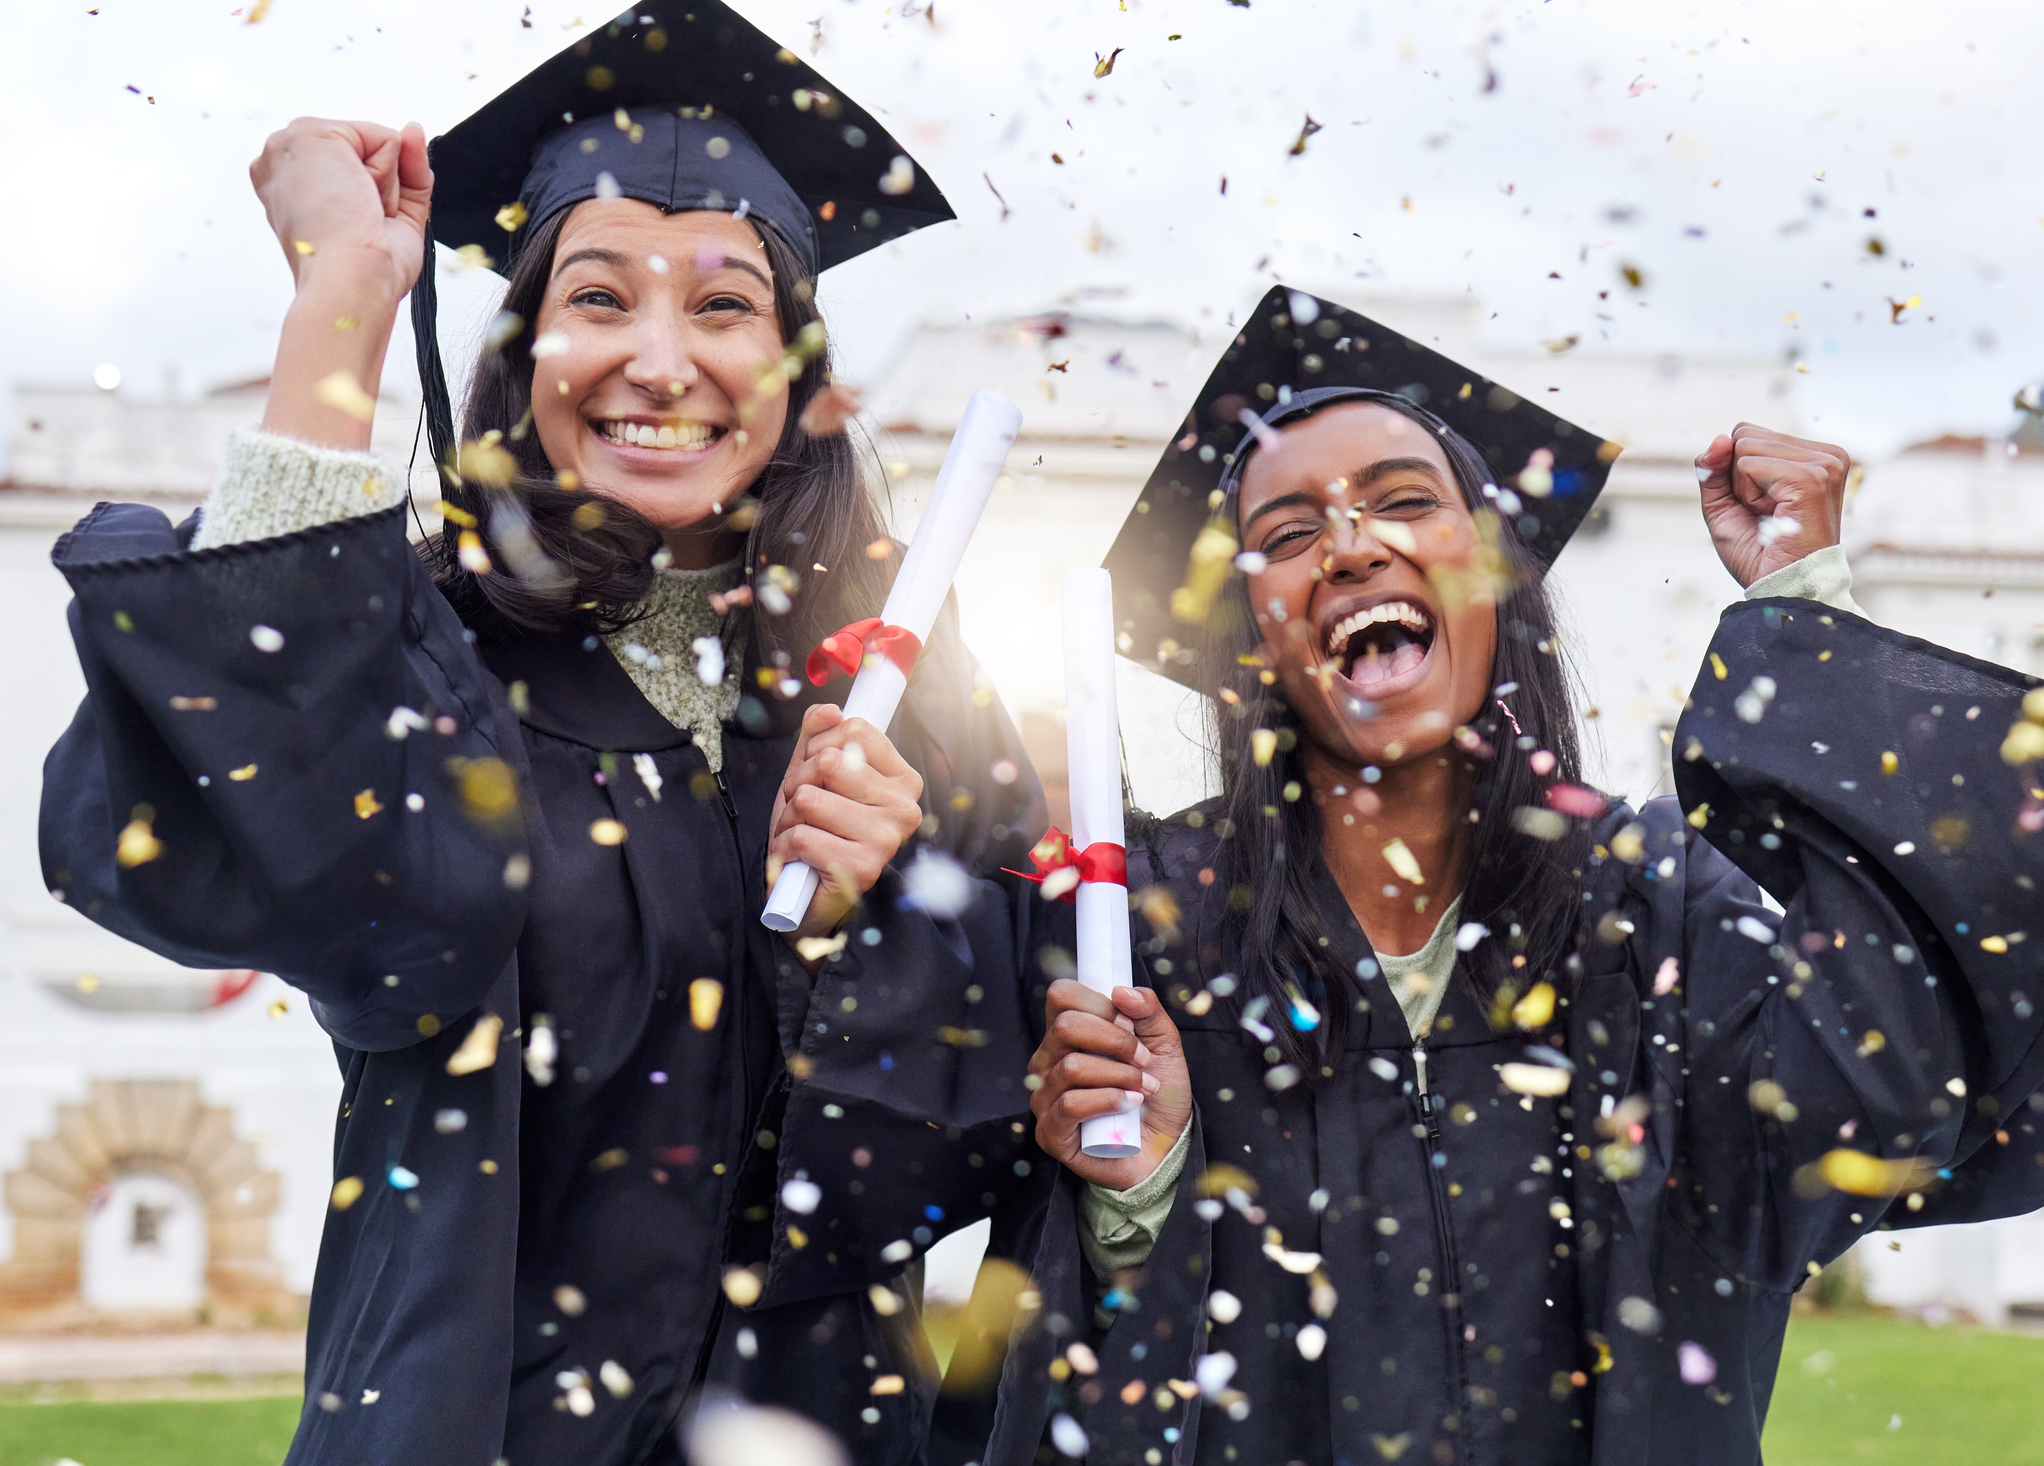 Cropped portrait of two attractive young female students celebrating on graduation day